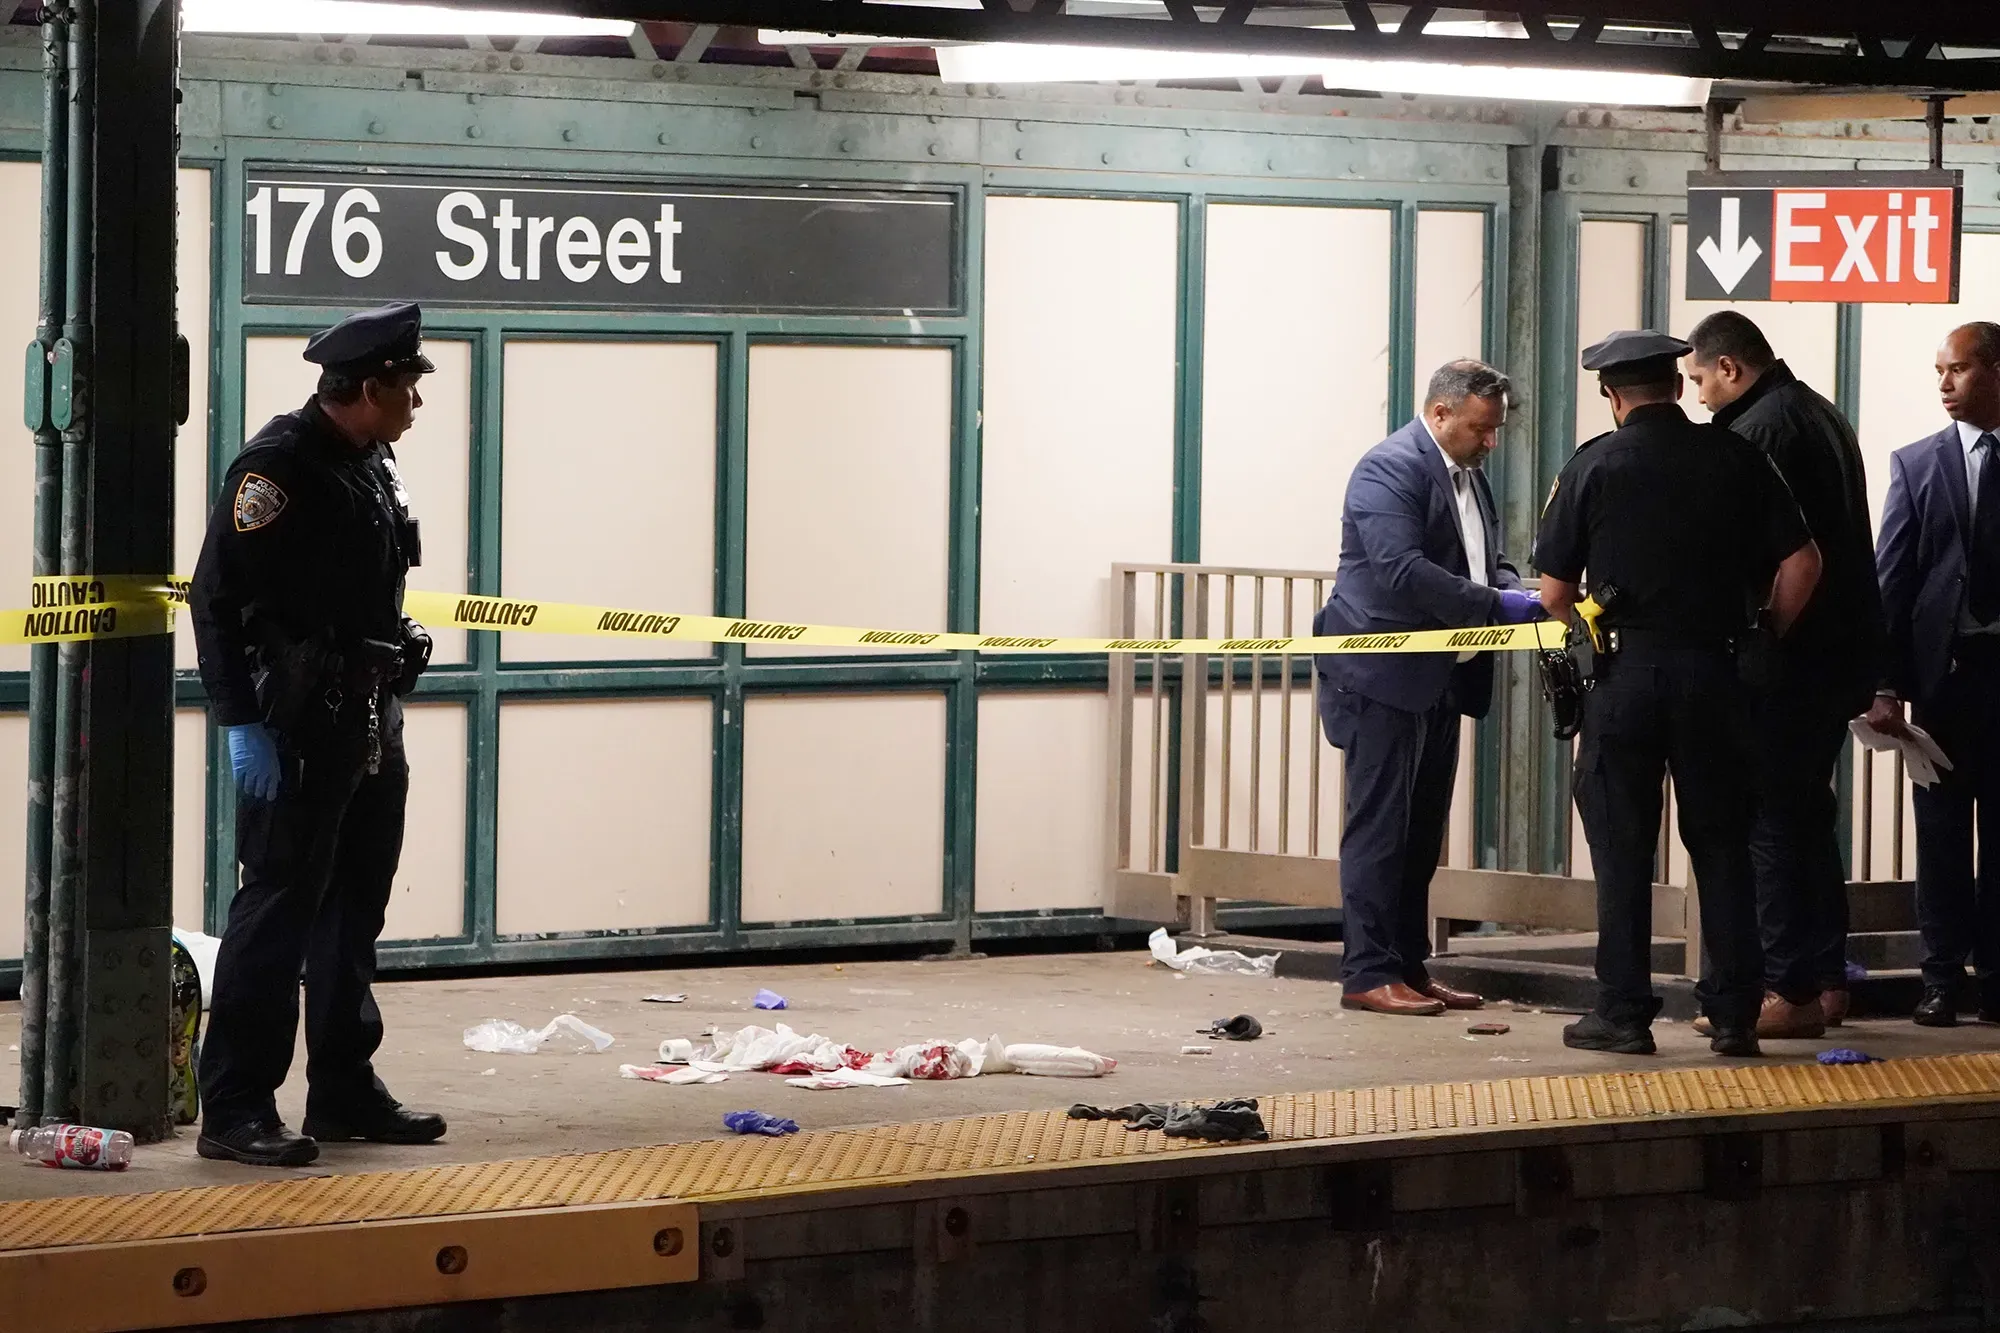 A victim was brutally stabbed on a Bronx subway station in New York City